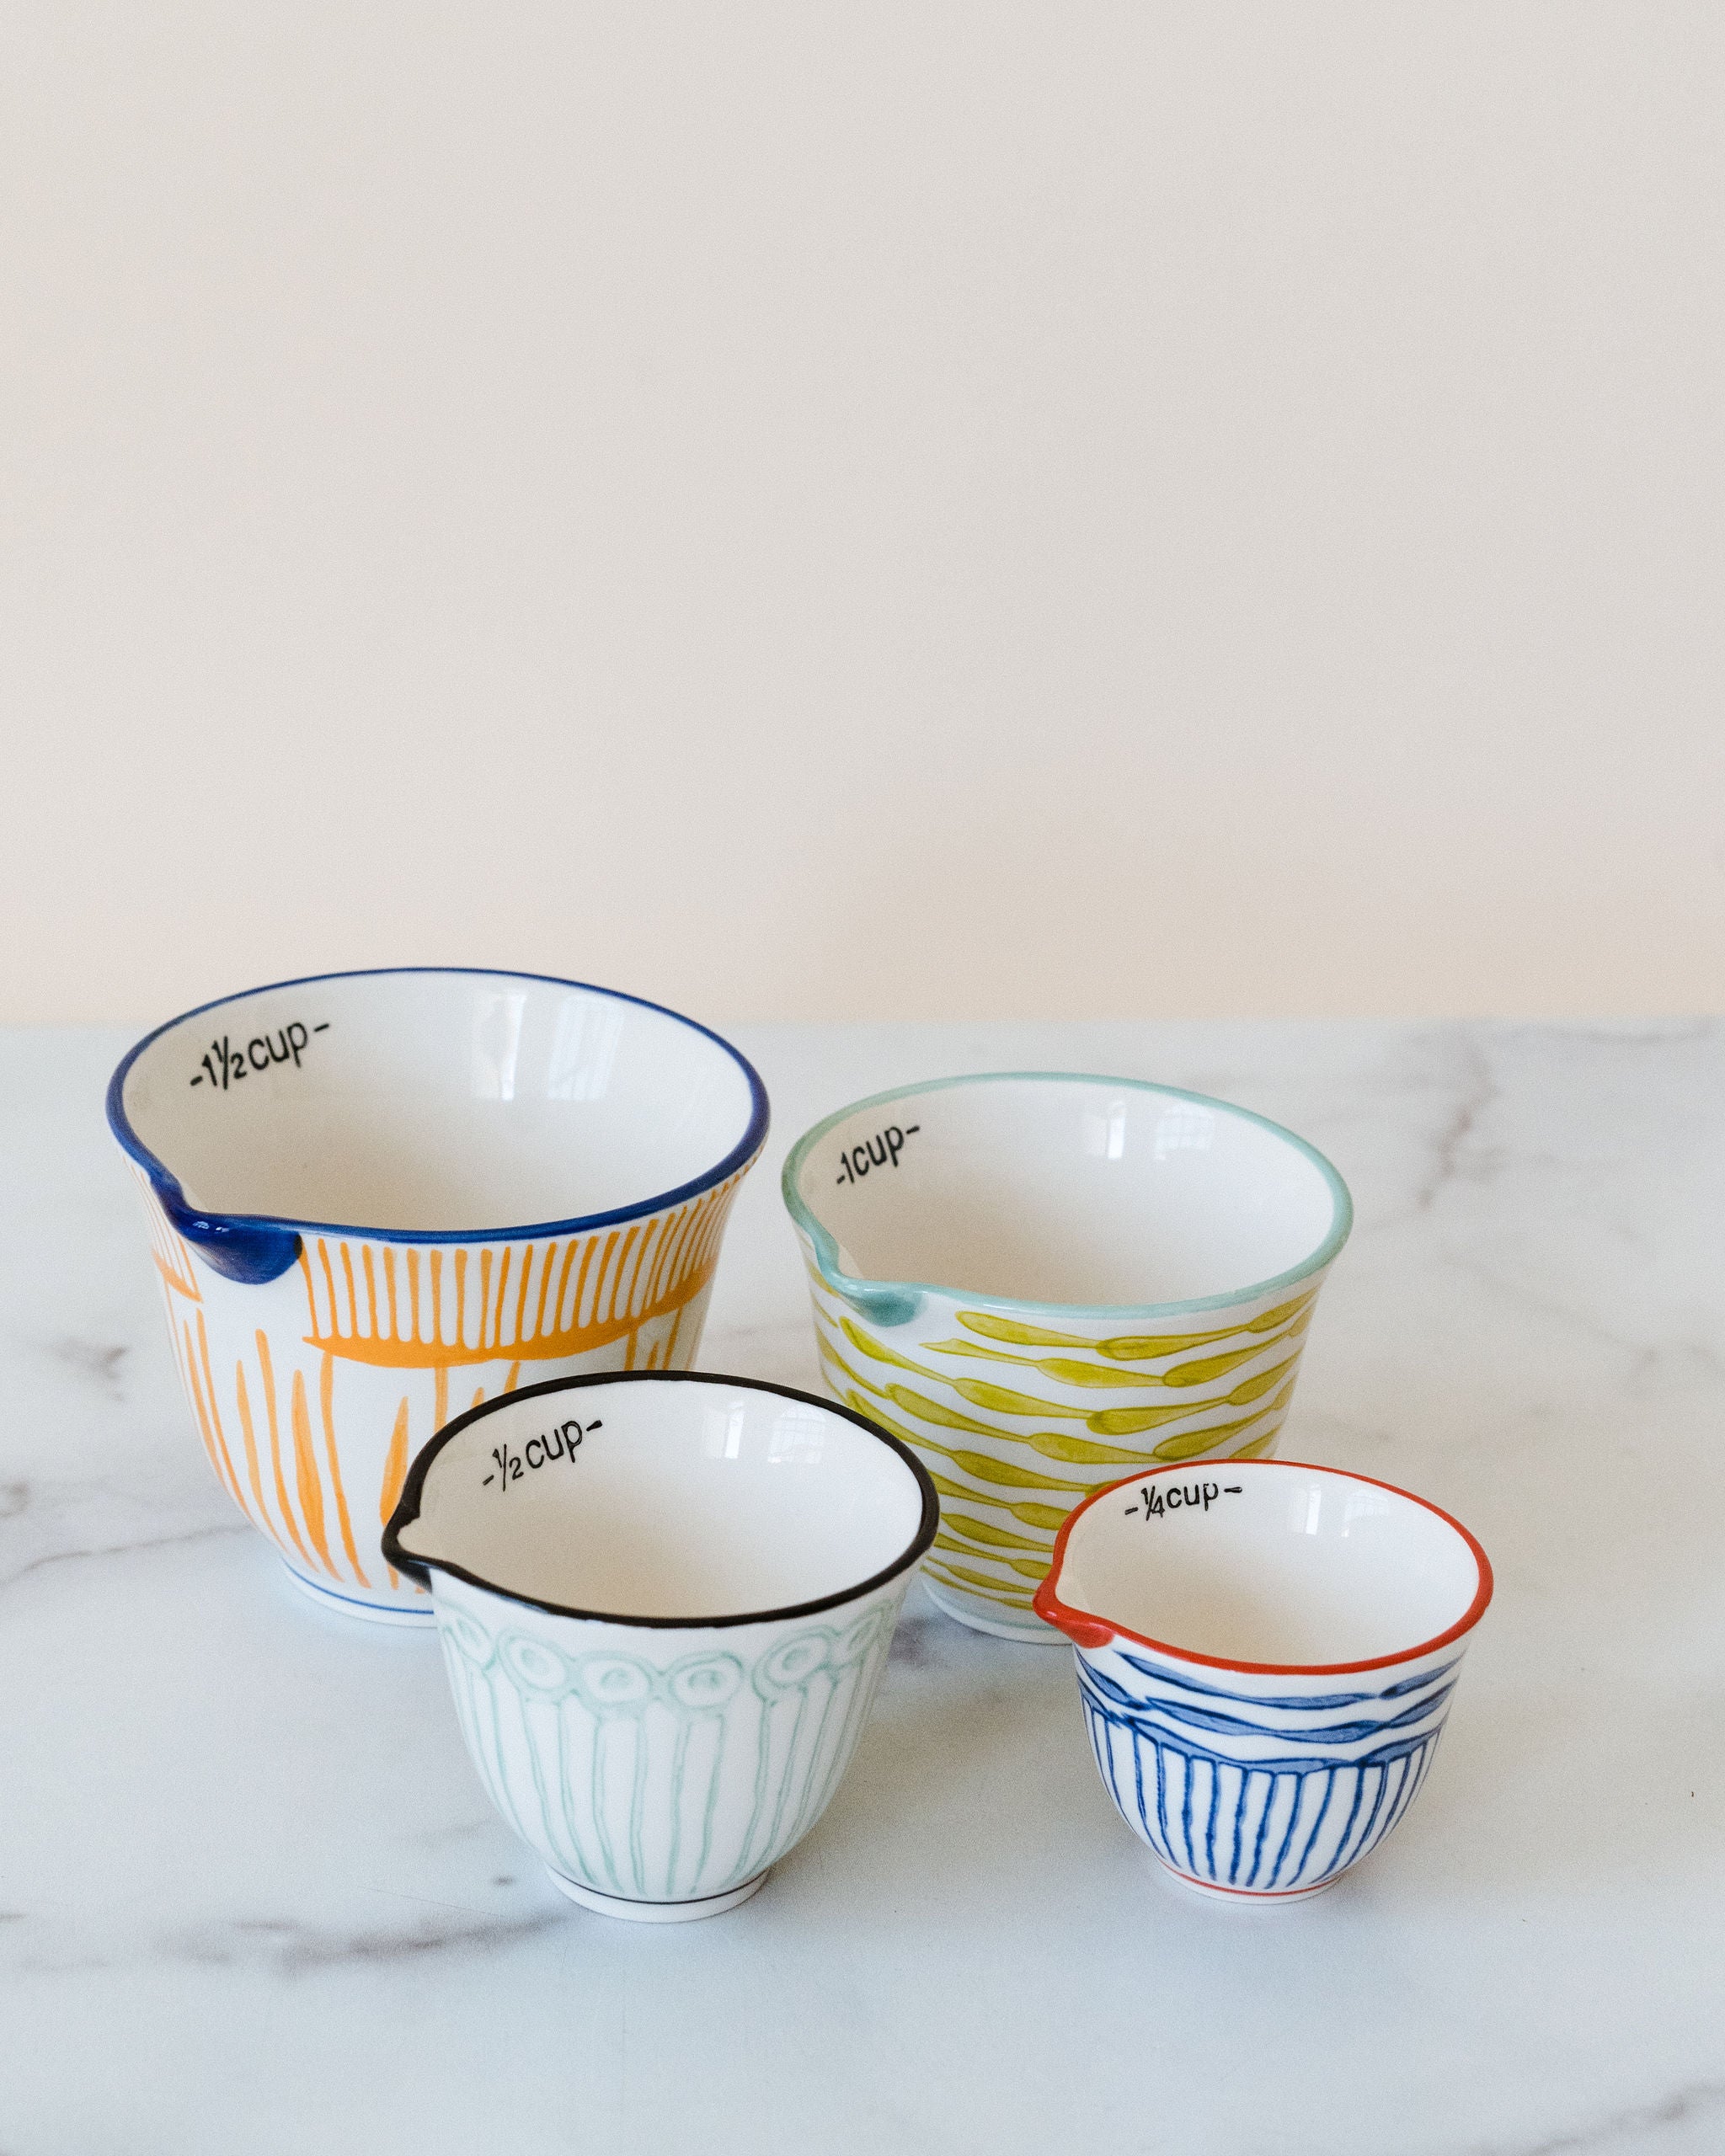 Black Patterned Stoneware Measuring Cups - Shop The Butler's Pantry